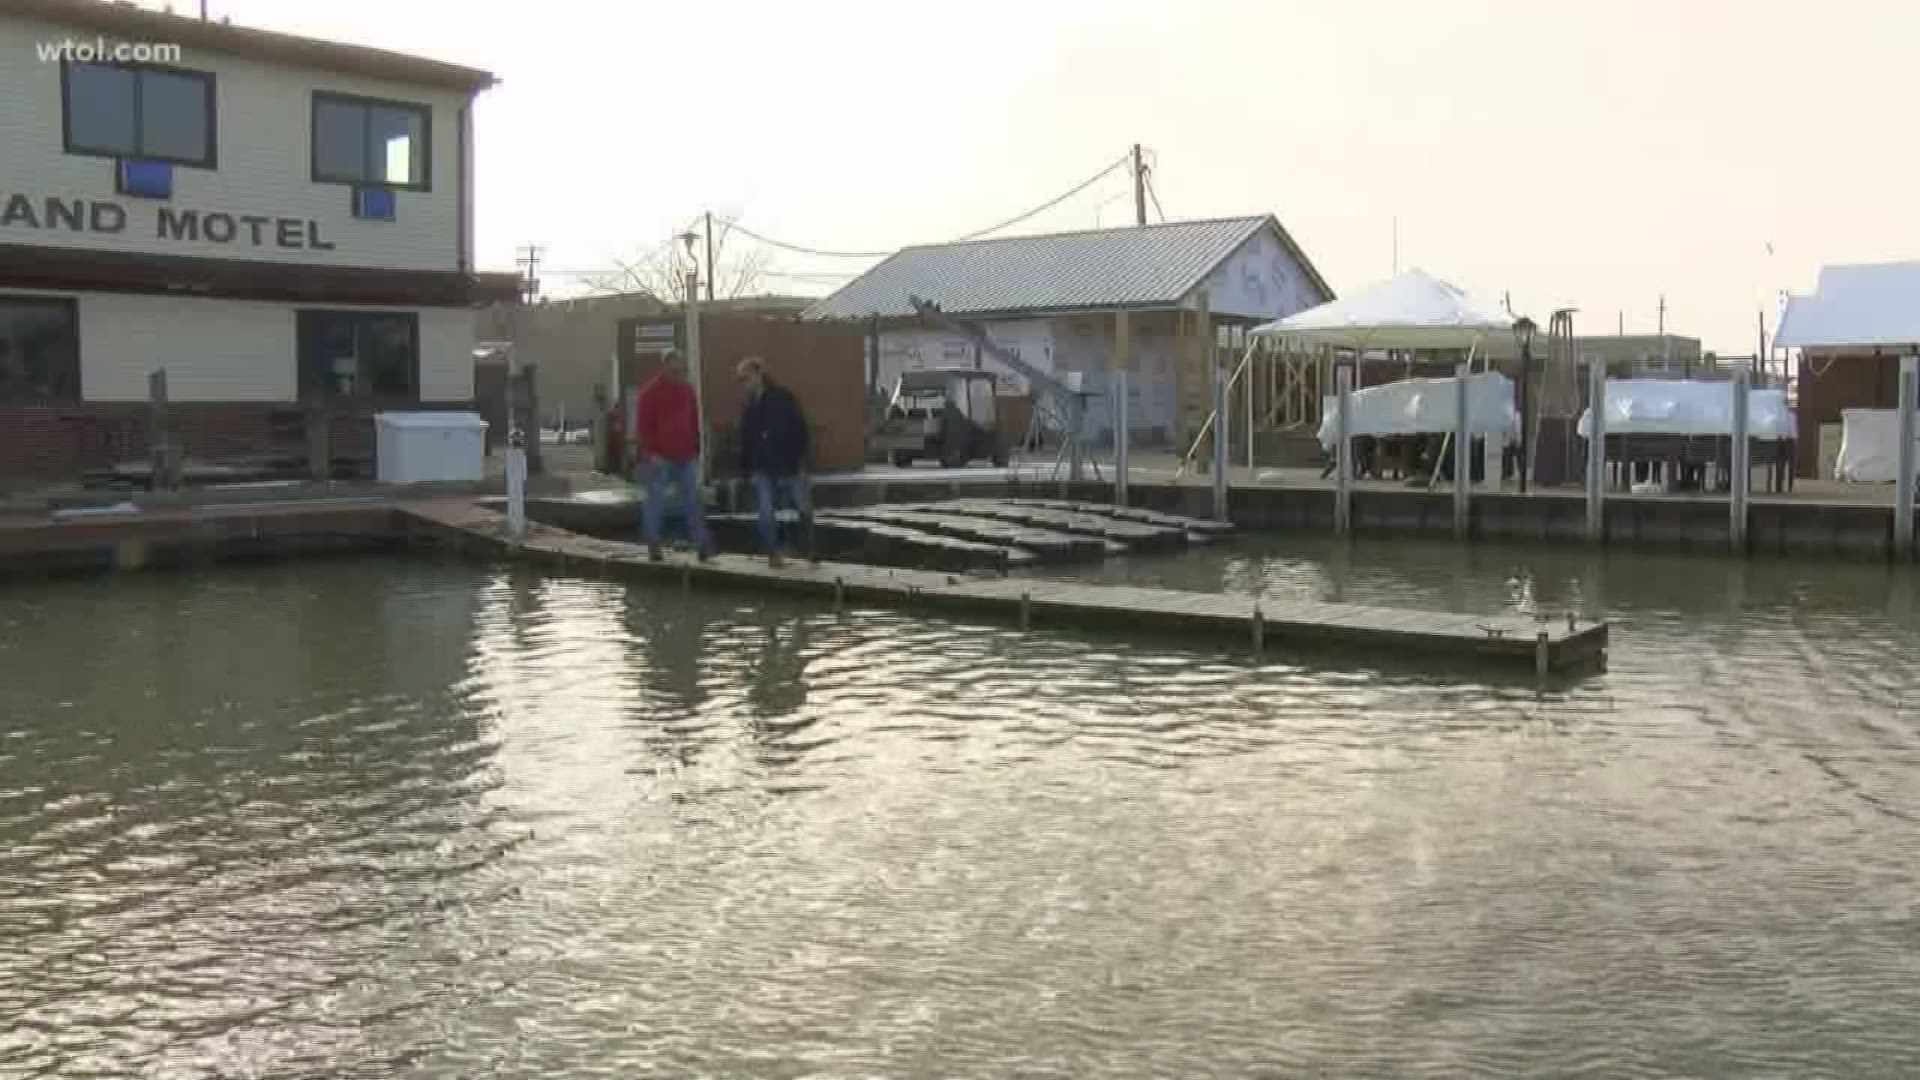 As bad as last summer was, the Army Corps of Engineers predict Lake Erie water levels will be even higher this year.